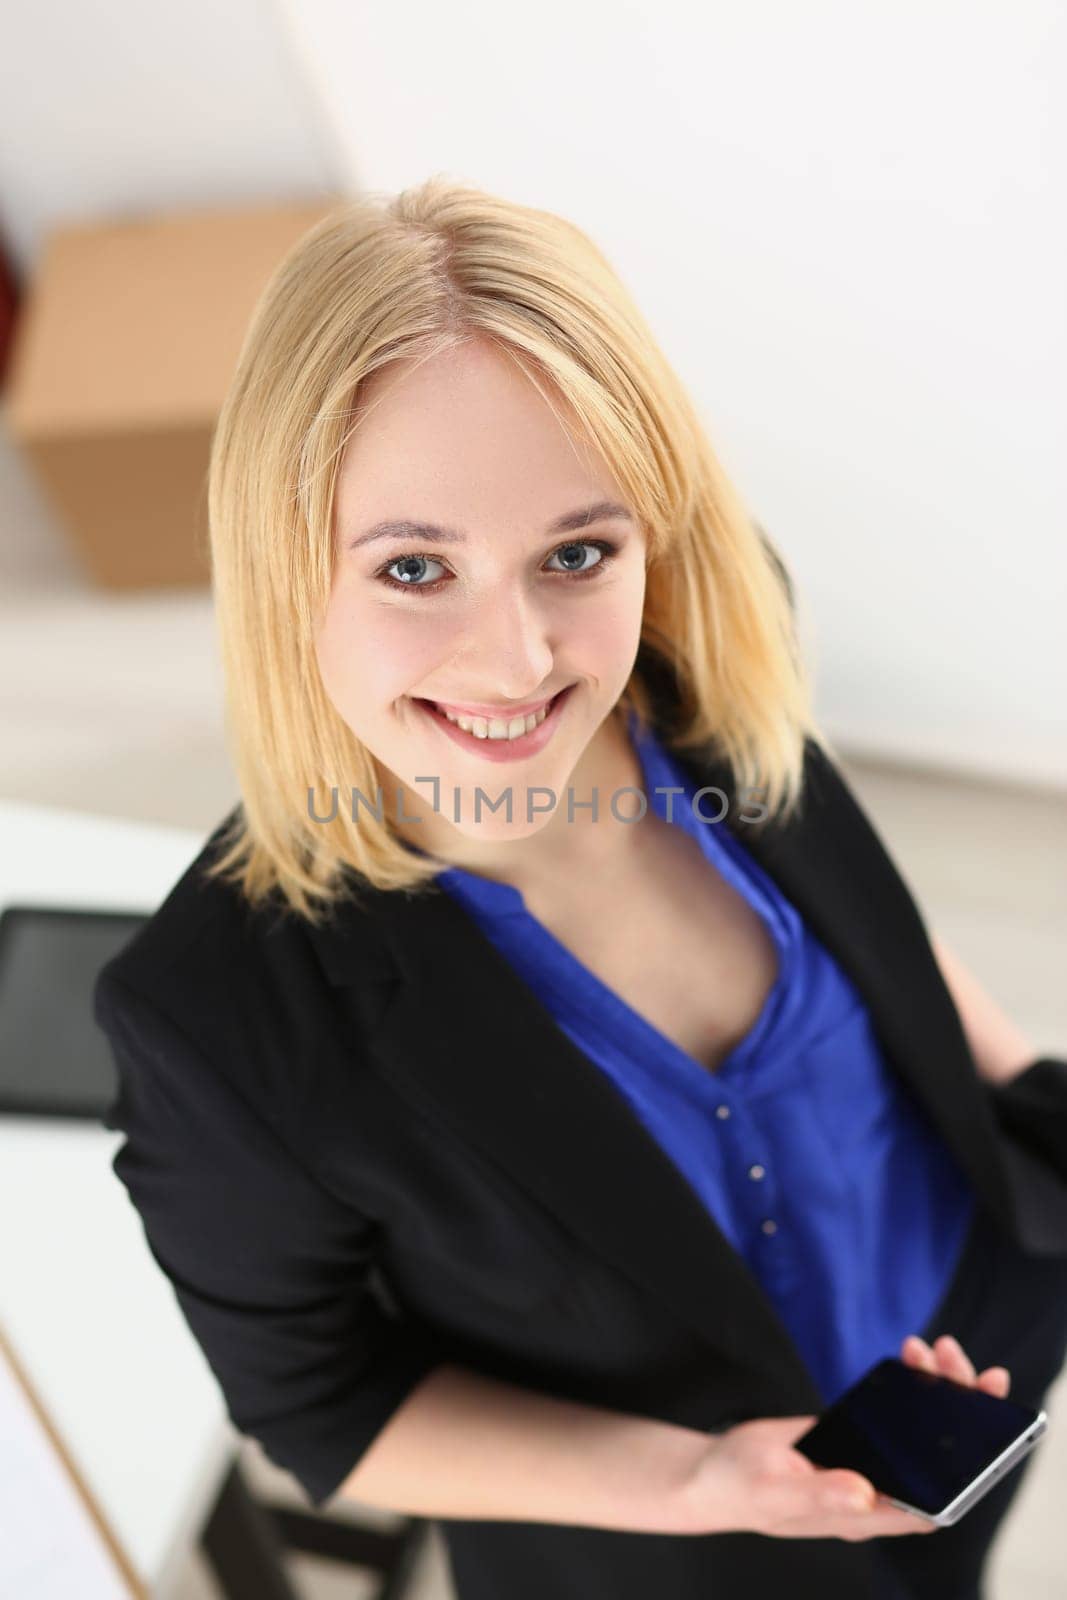 Beautiful smiling business woman holding smartphone. Applications for business and personal business consultant